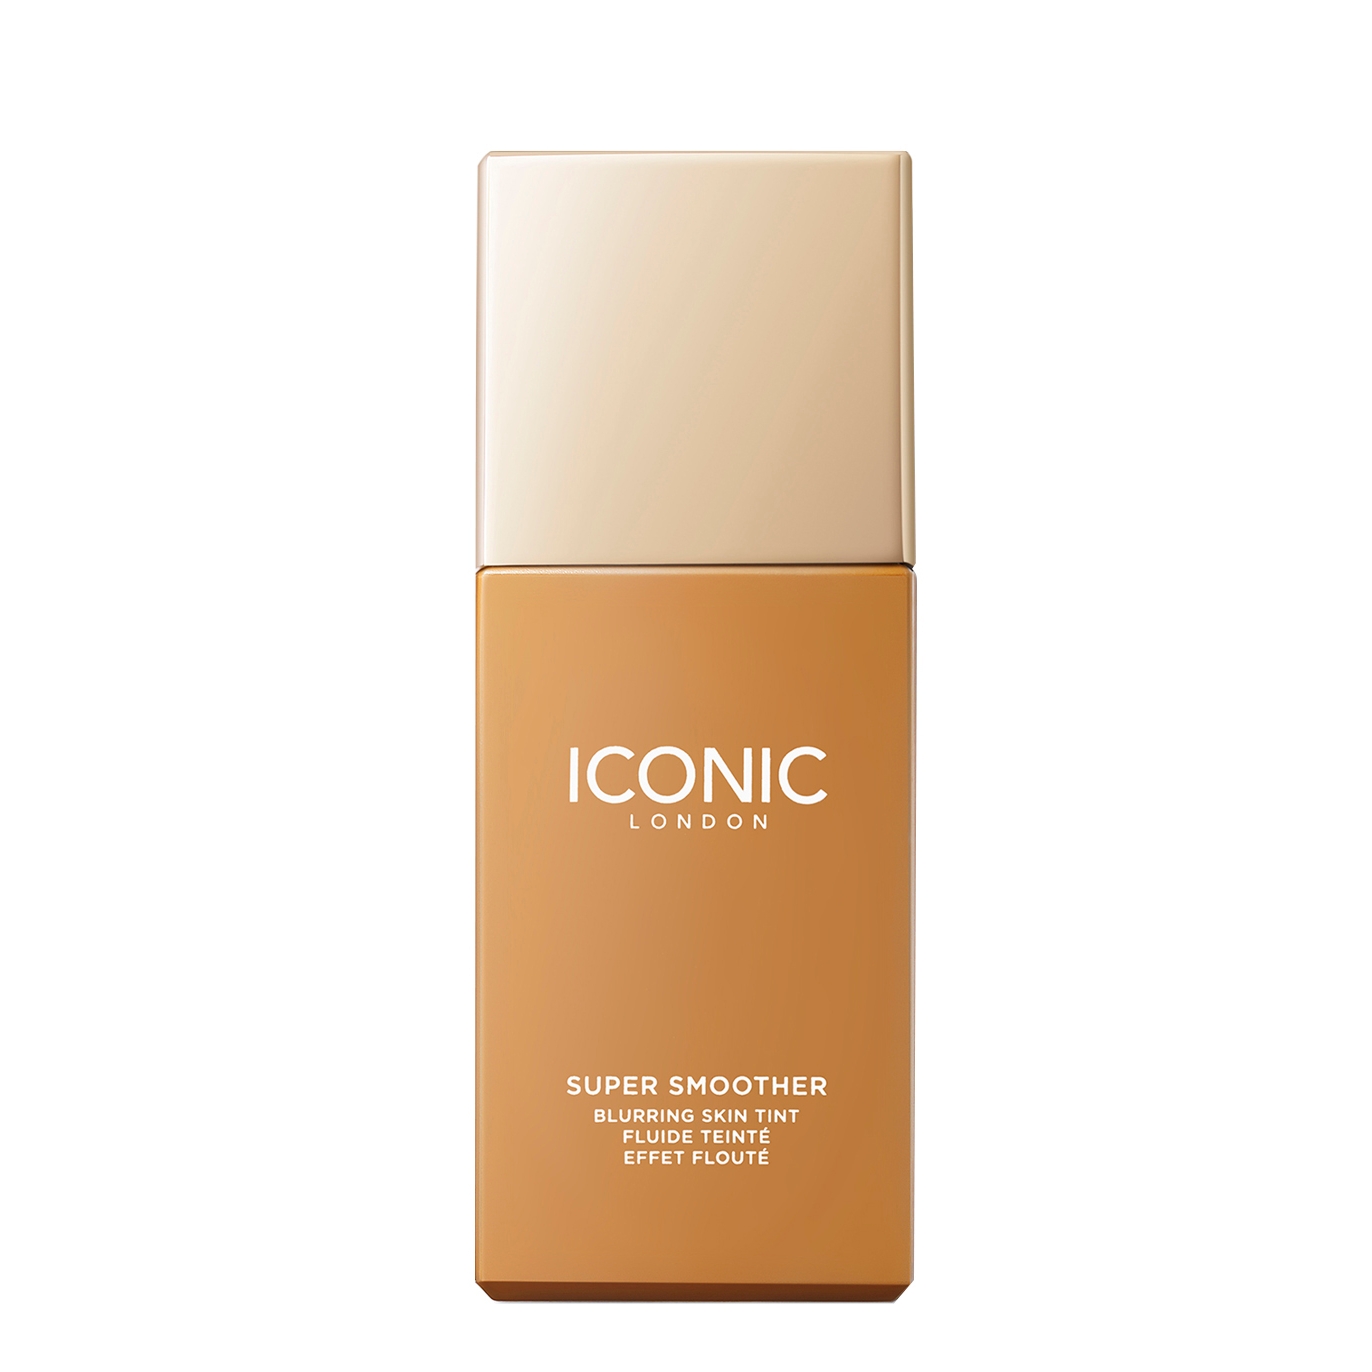 Iconic London Super Smoother Blurring Skin Tint - Colour Golden Tan